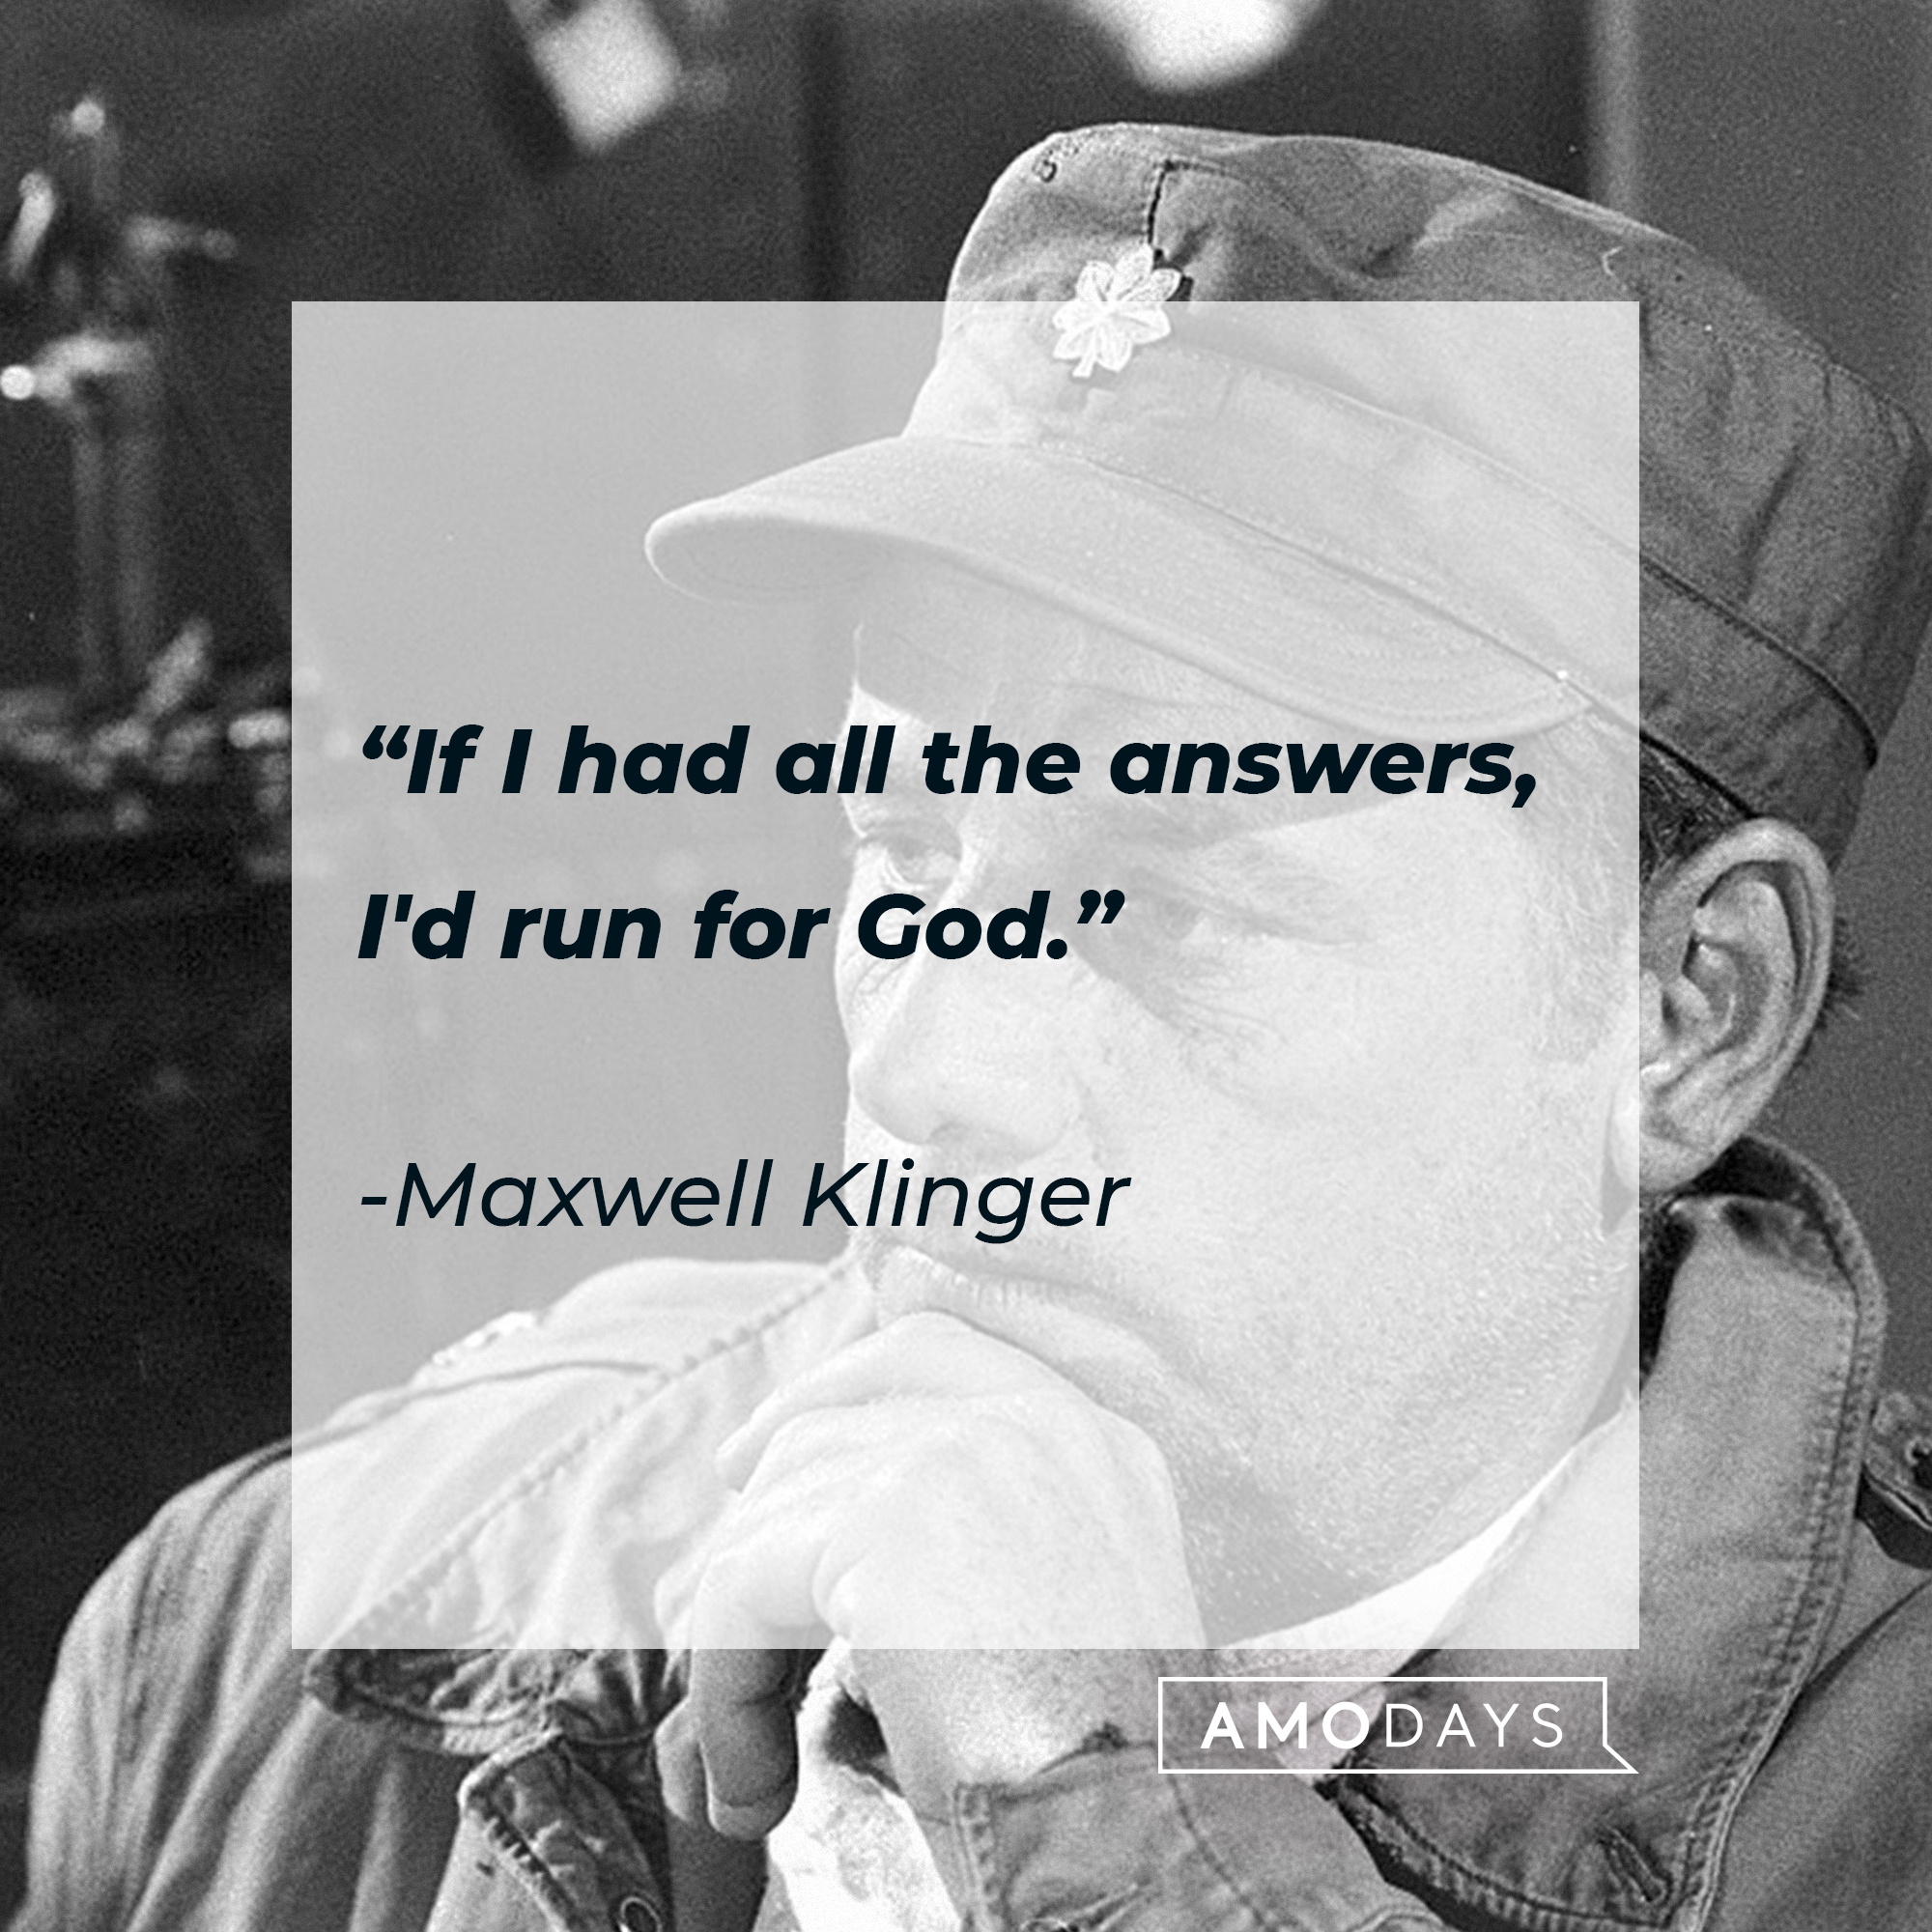 Maxwell Klinger's quote: "If I had all the answers, I'd run for God." | Source: Getty Images